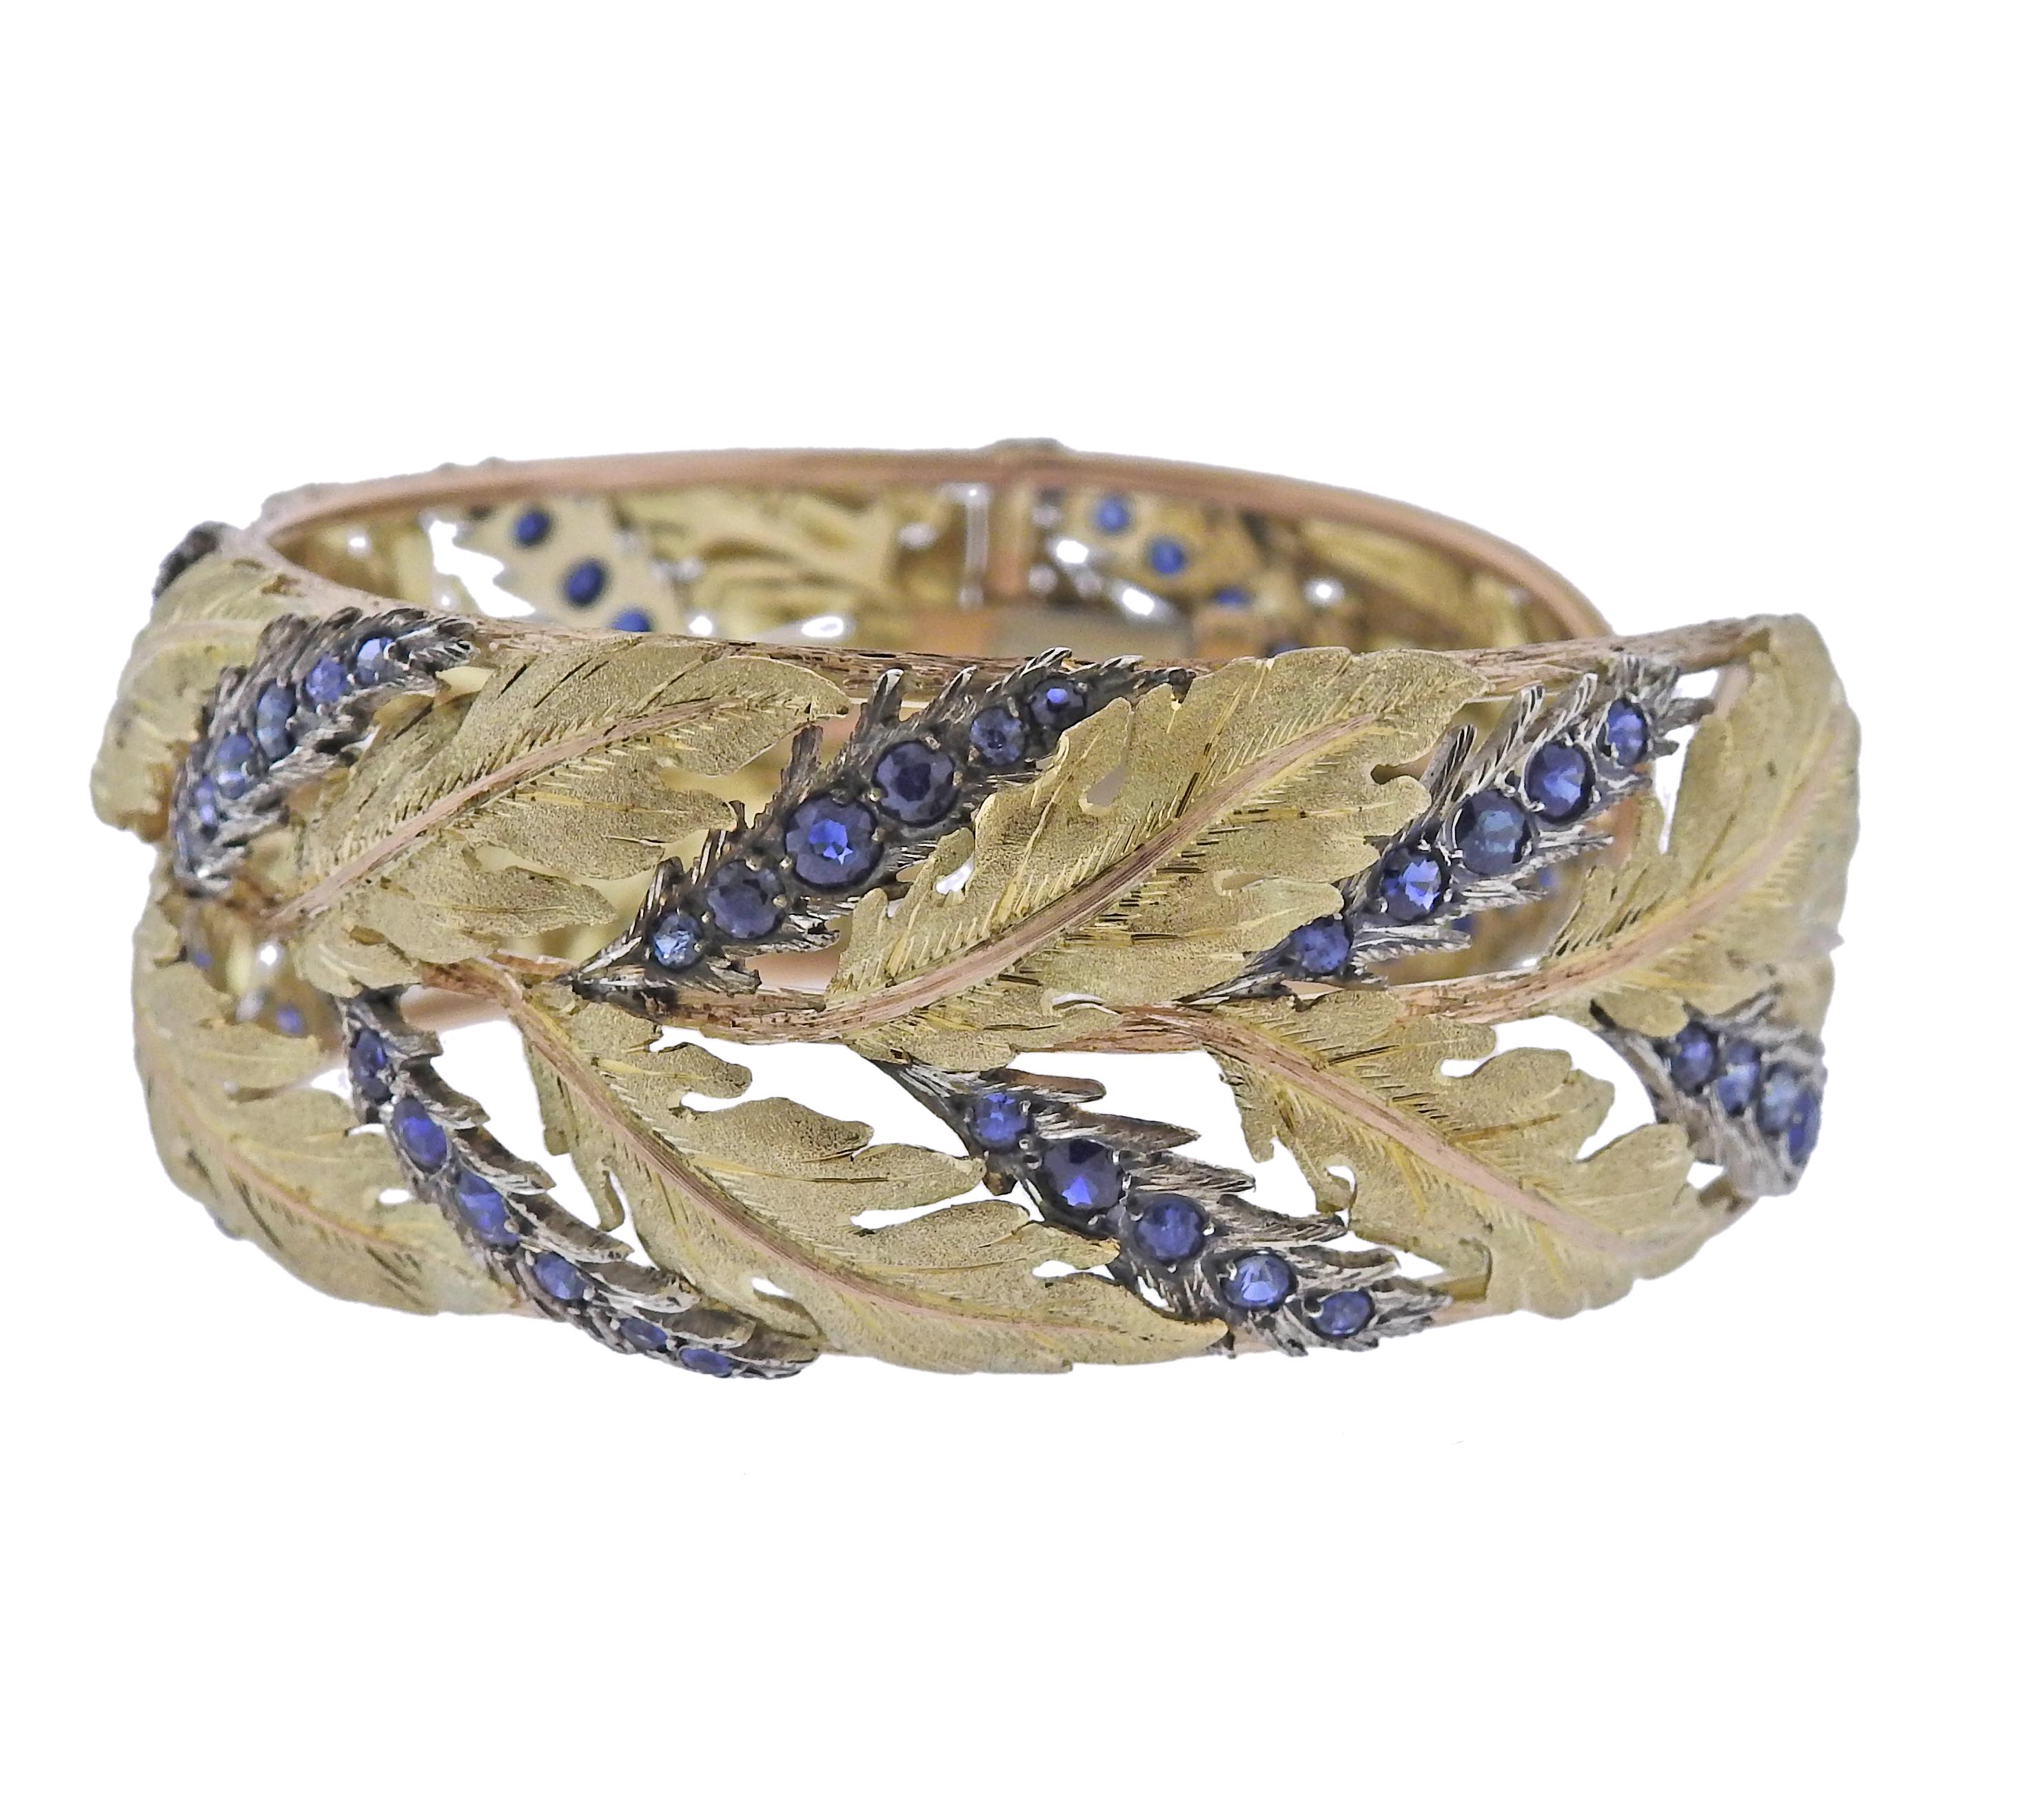 18k tri color gold leaf motif cuff bracelet by Mario Buccellati, adorned with blue sapphires. Bracelet will fit approx. 7